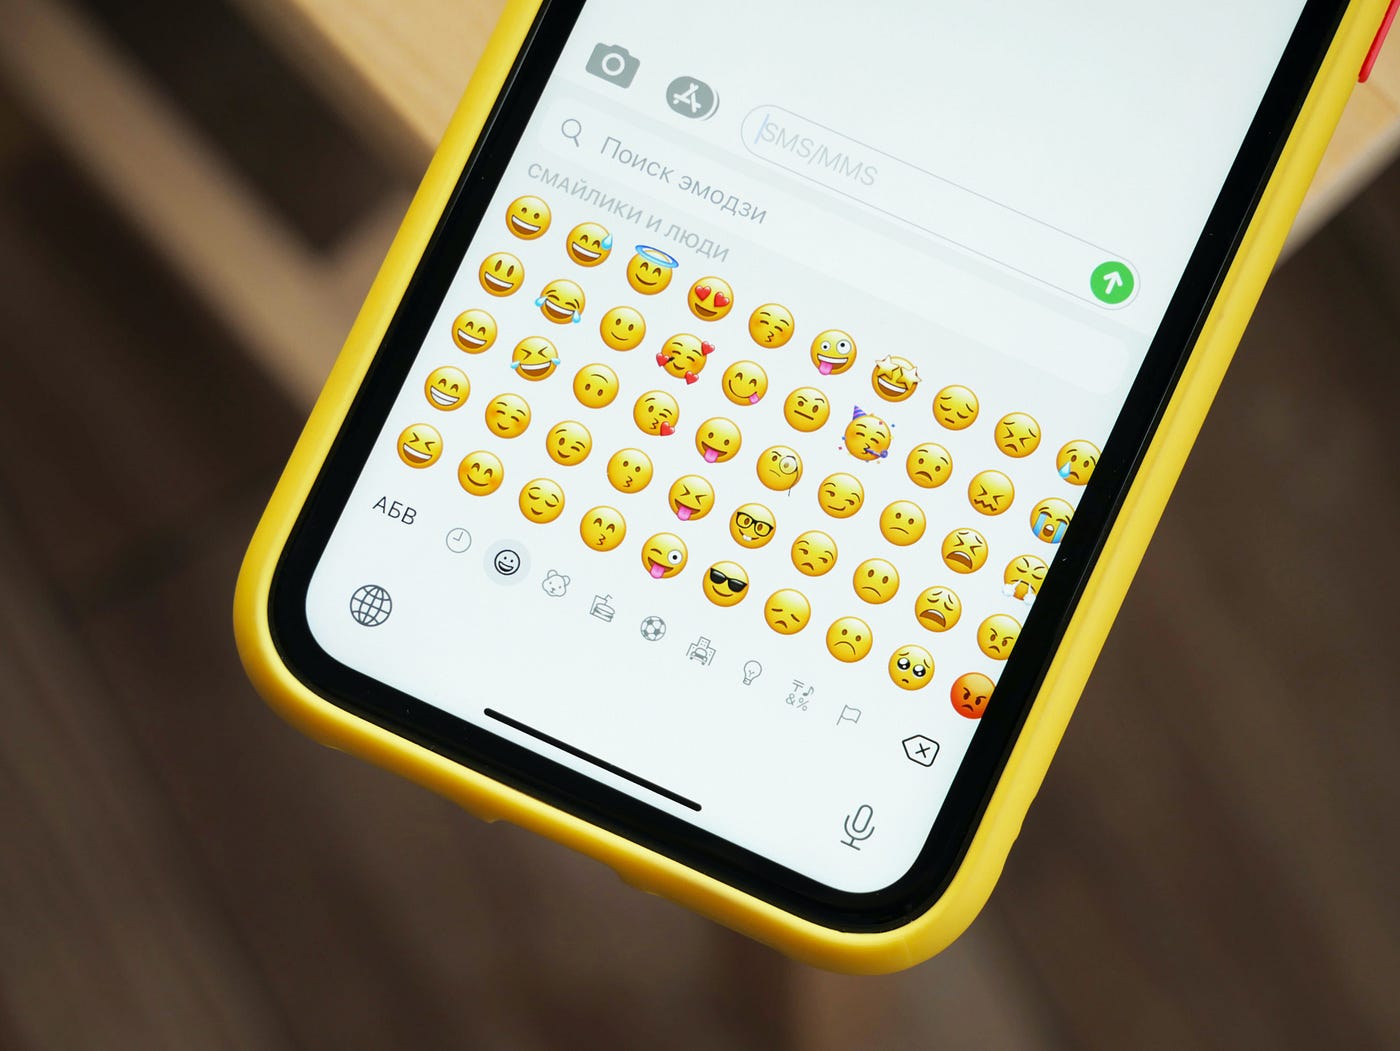 Emojis Can Complicate Workplace Messages Among Co-Workers